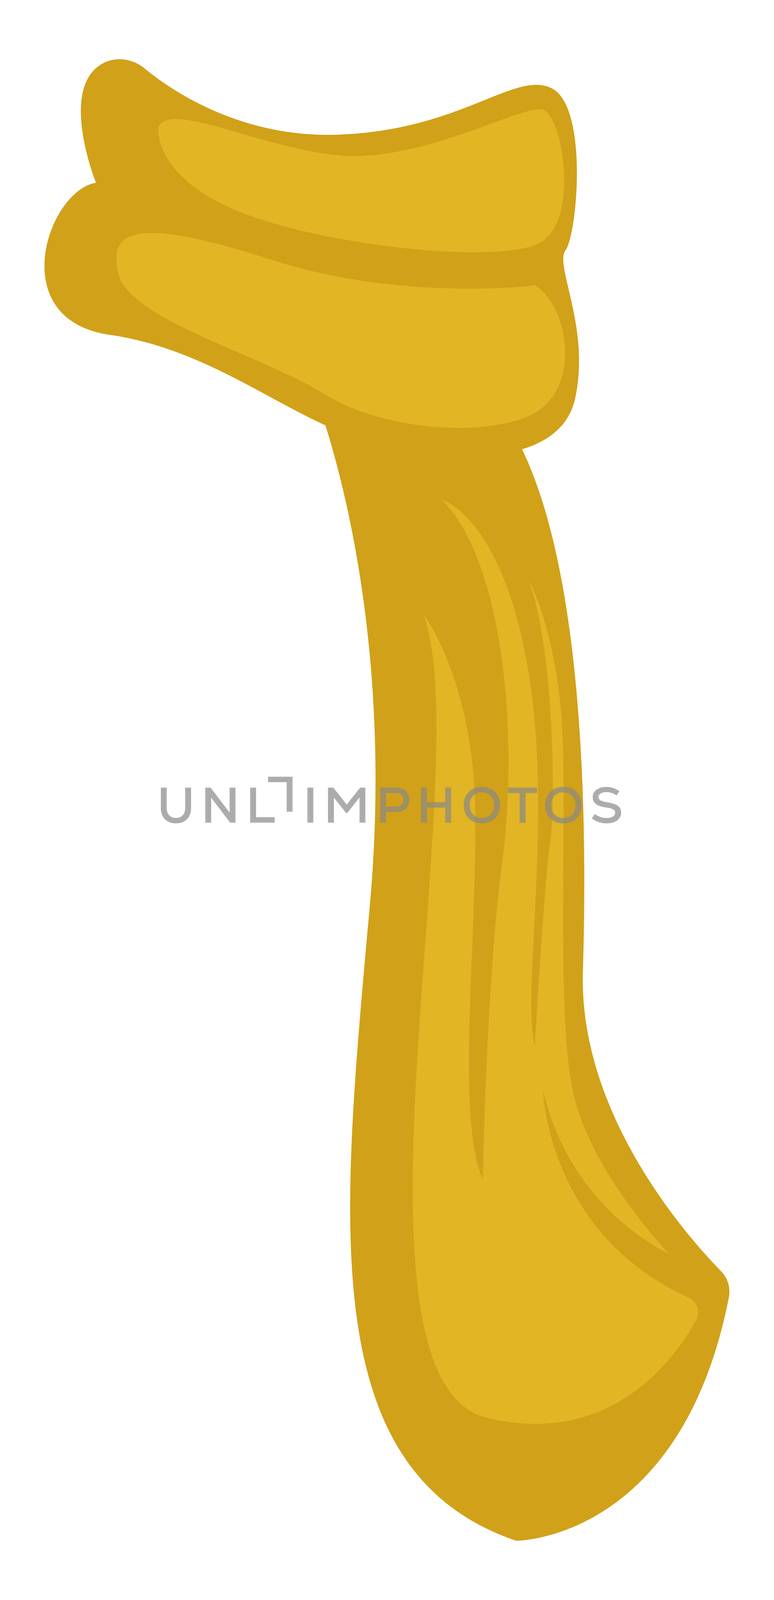 Yellow winter scarf, illustration, vector on white background